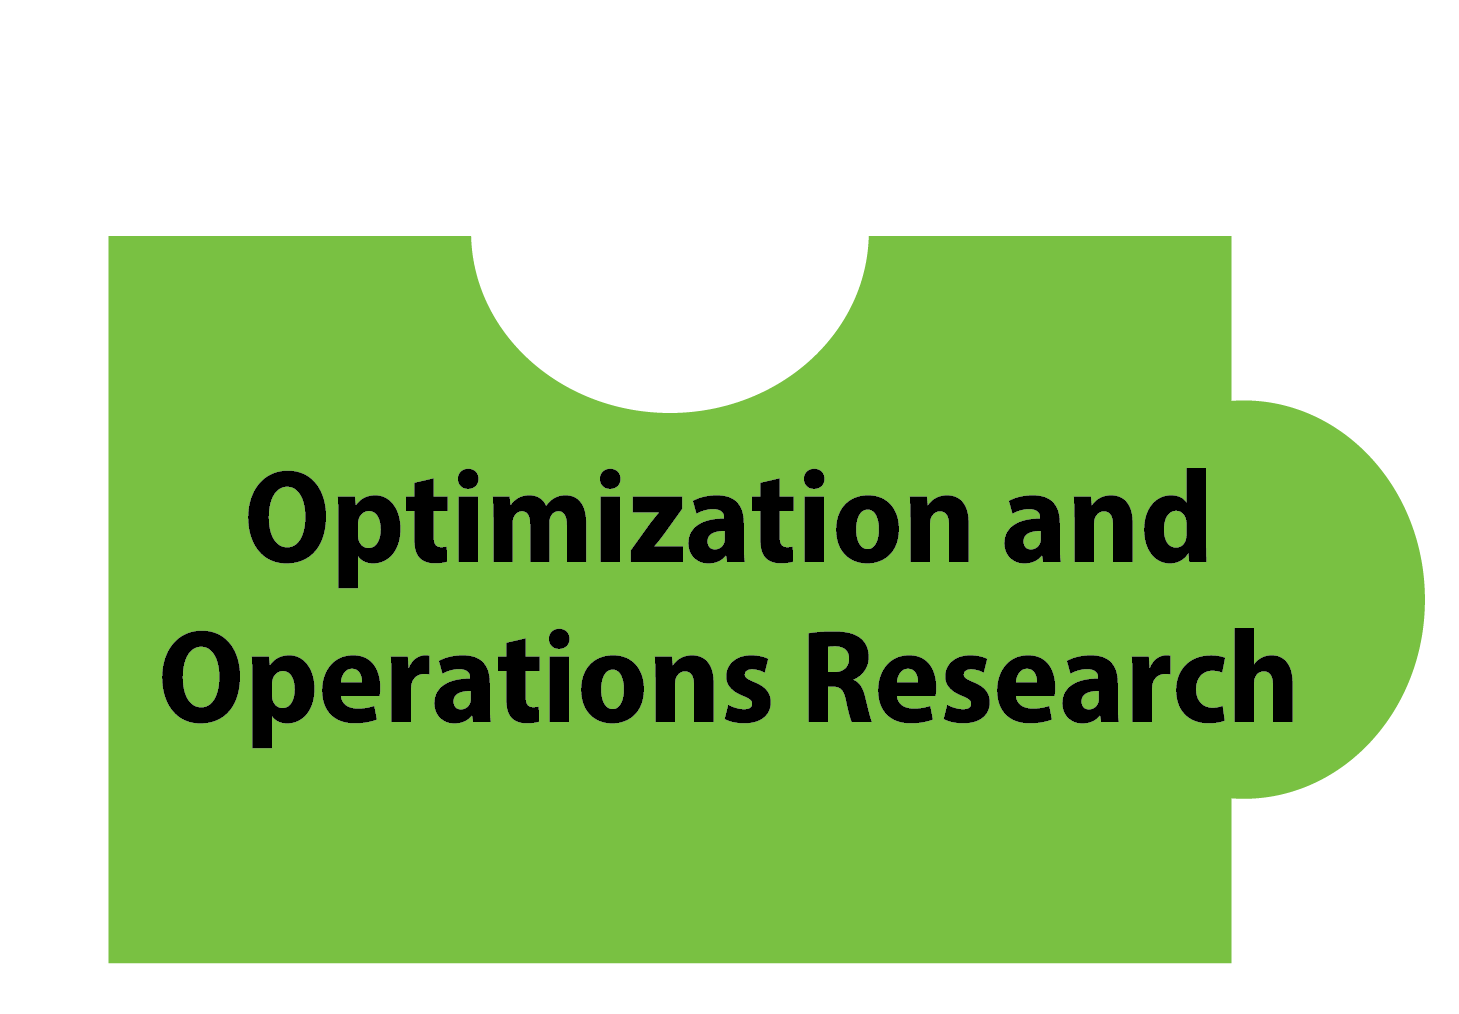 Core Research Groups